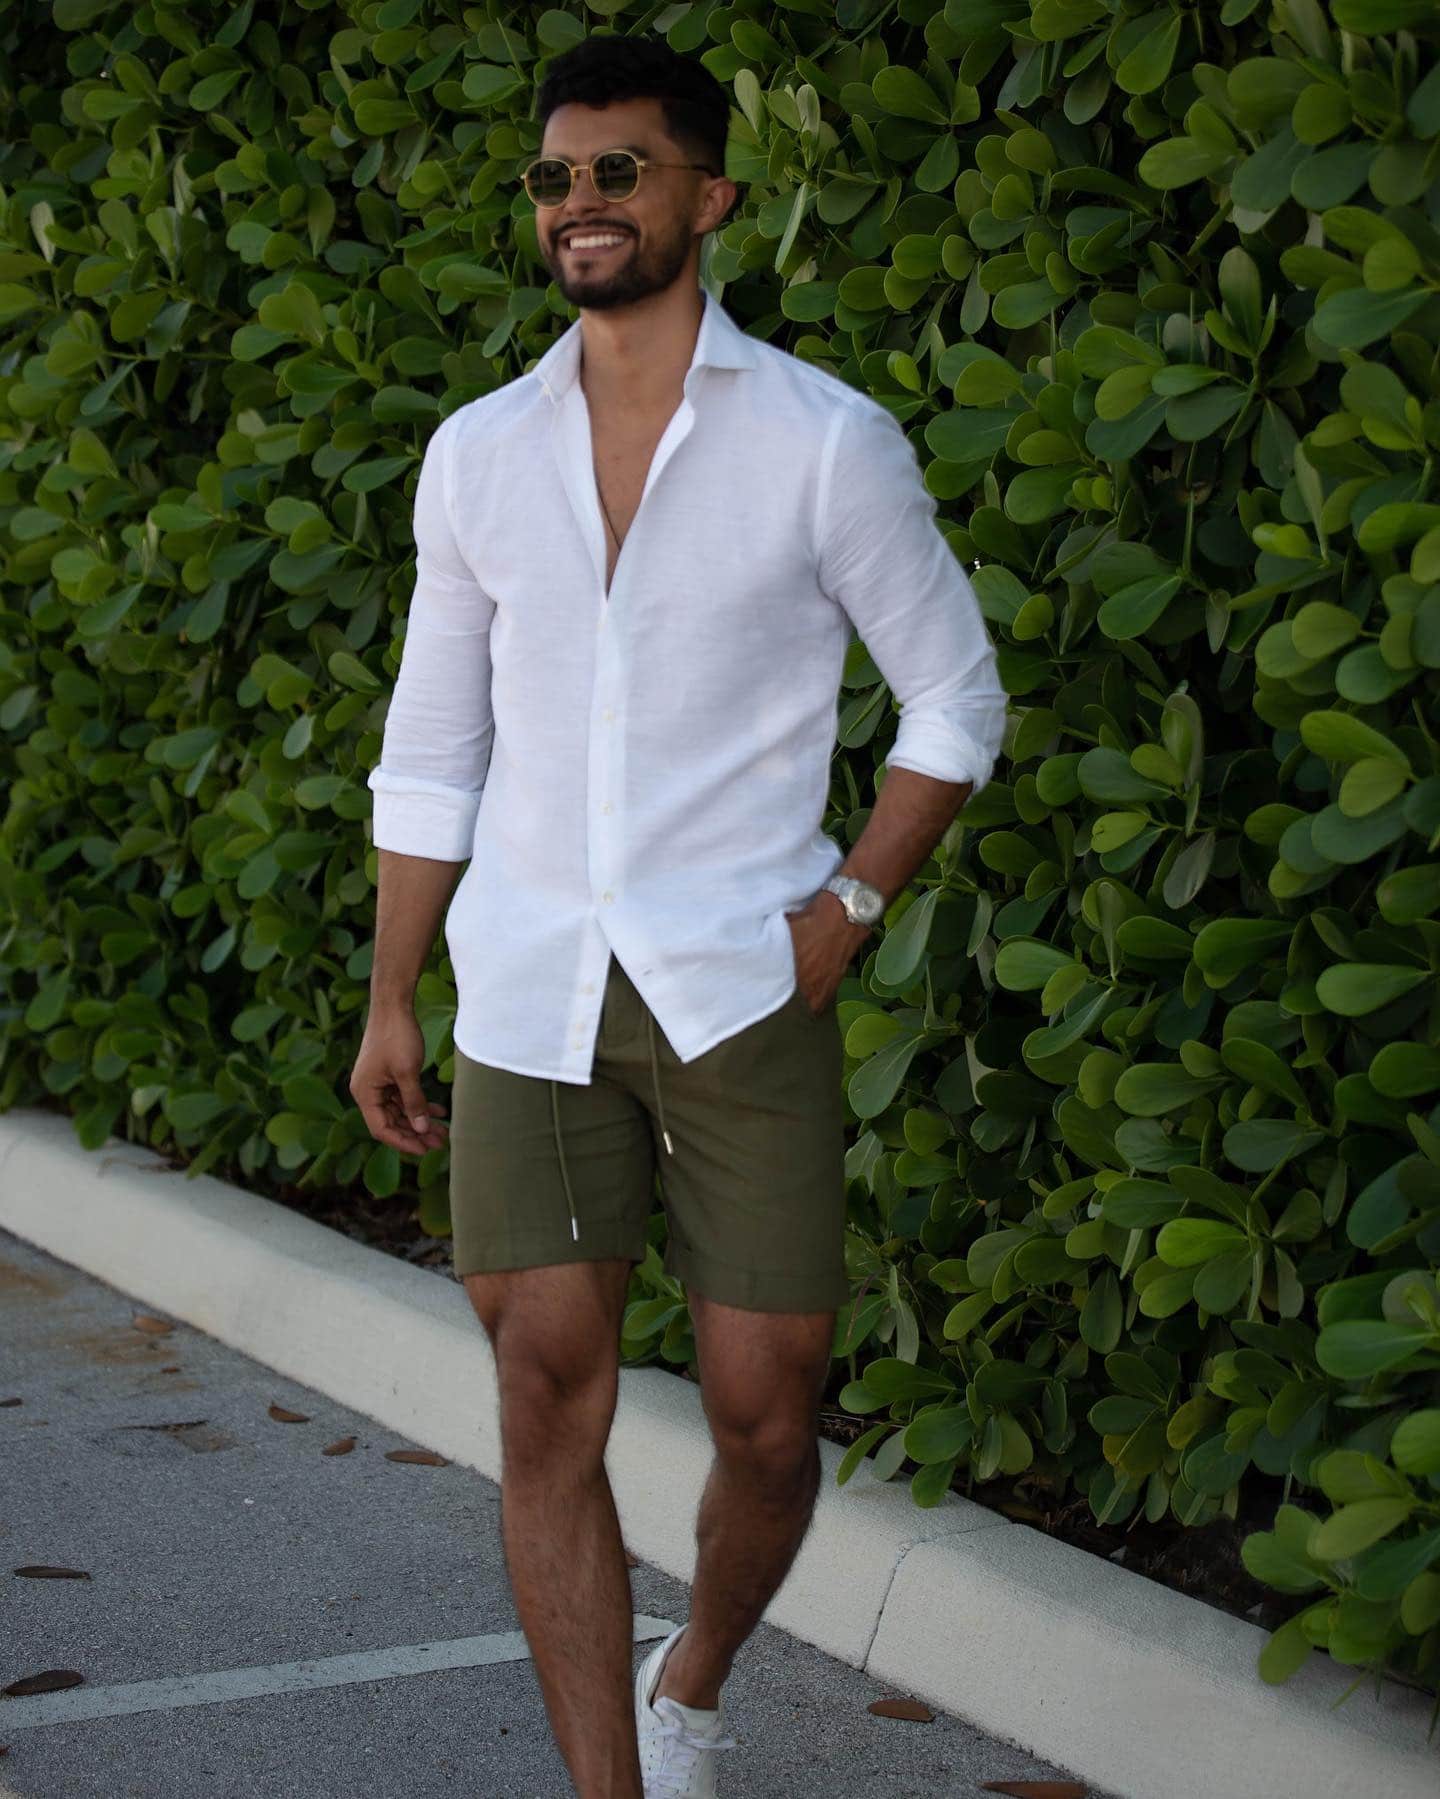 Men Honeymoon Outfits - 40 Outfits to Pack for Honeymoon